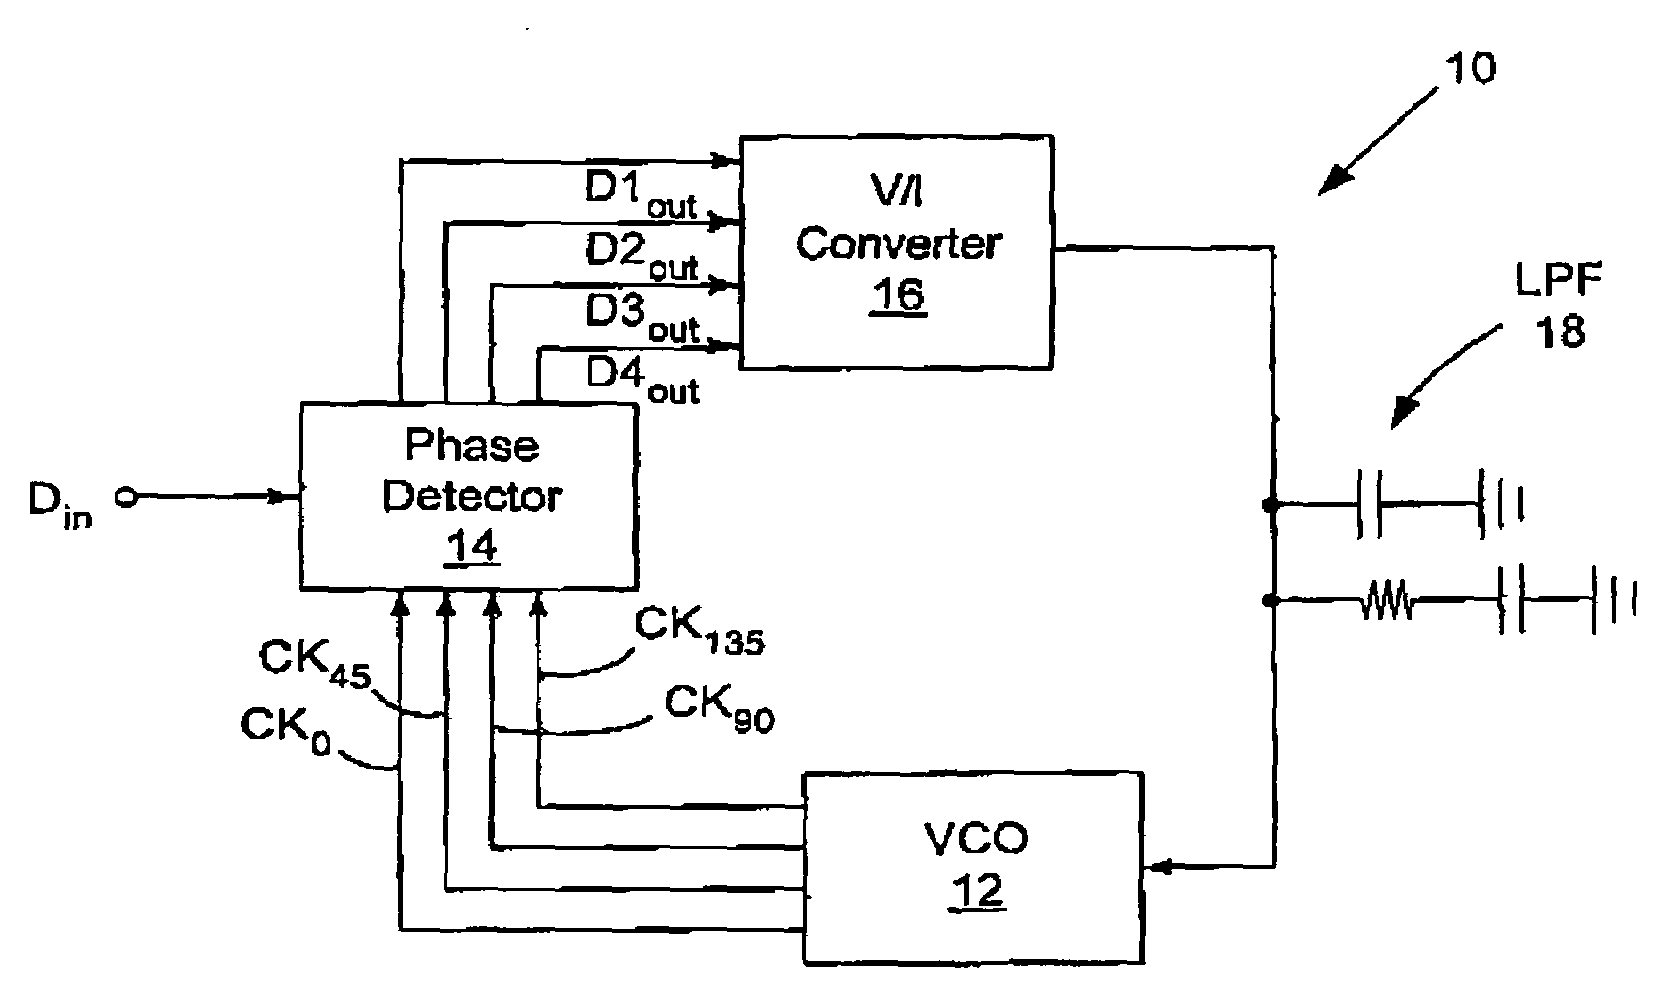 High-speed clock and data recovery circuit